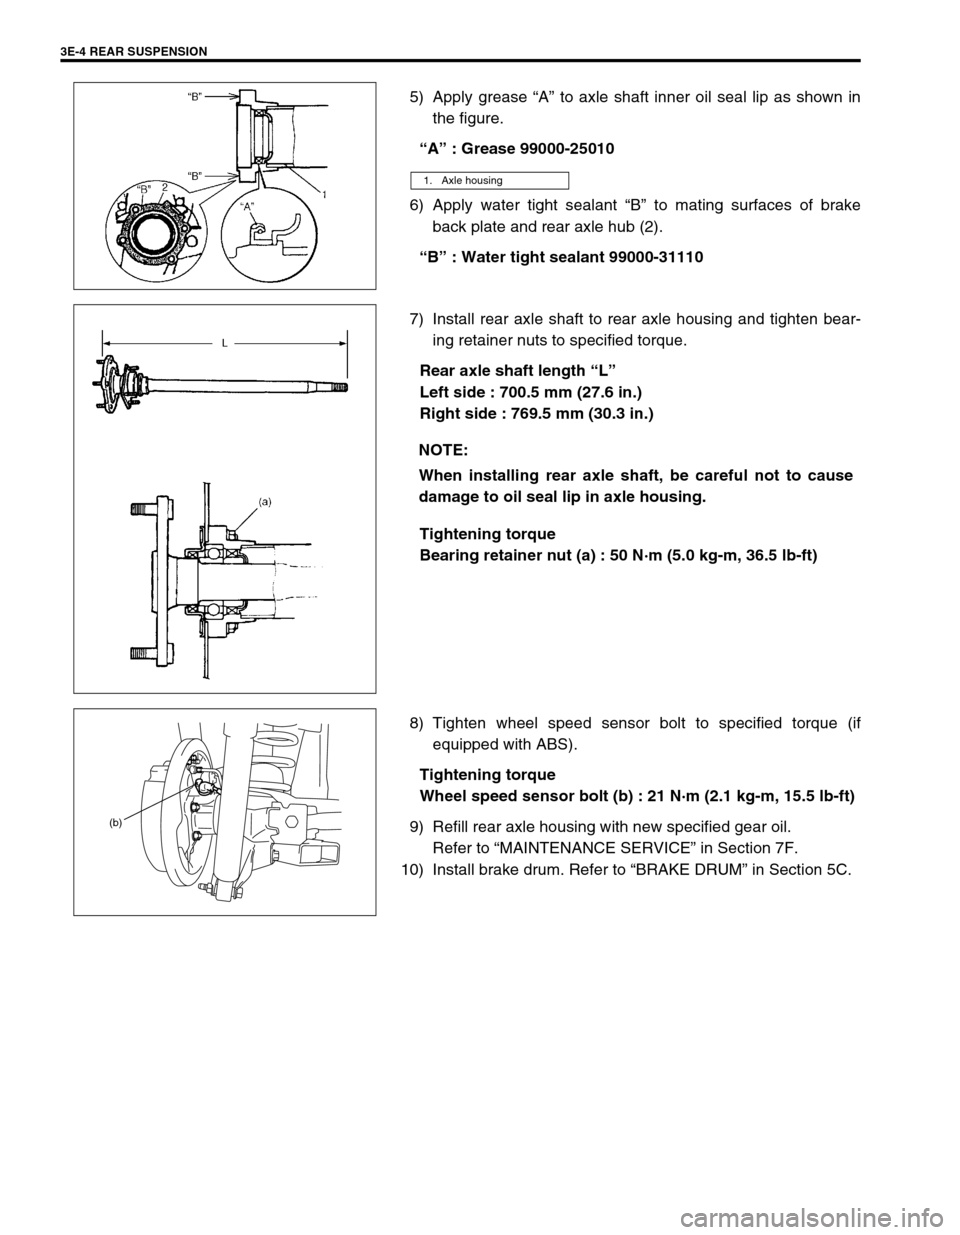 SUZUKI GRAND VITARA 1999 2.G Owners Manual 3E-4 REAR SUSPENSION
5) Apply grease “A” to axle shaft inner oil seal lip as shown in
the figure.
“A” : Grease 99000-25010
6) Apply water tight sealant “B” to mating surfaces of brake
back